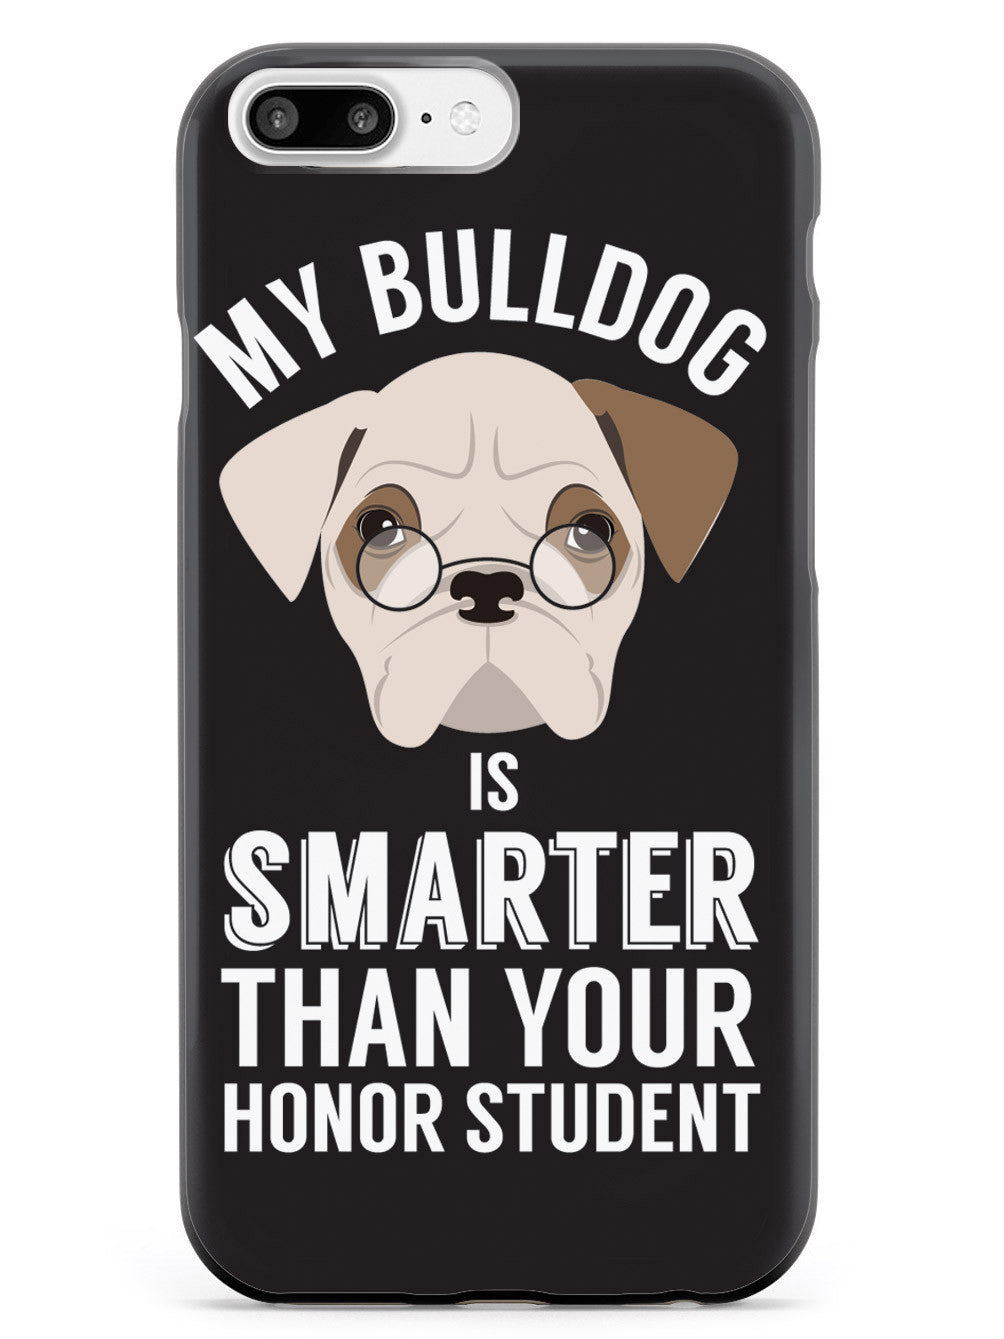 Smarter Than Your Honor Student - Bulldog Case